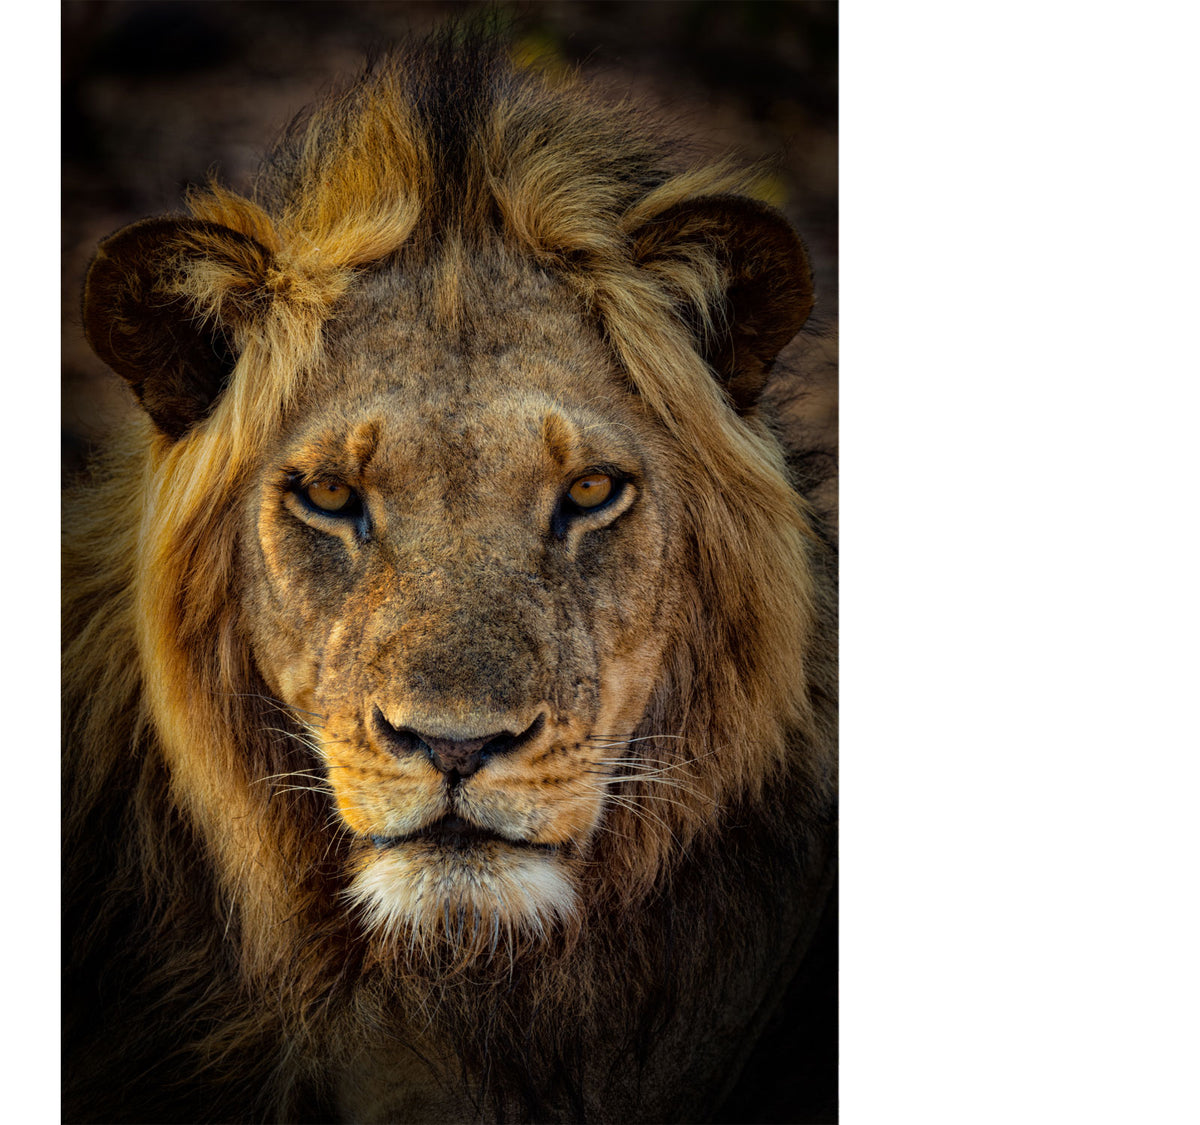 LIK Fine Art photograph from Peter Lik featuring a striking portrait of a lion staring directly at the viewer.